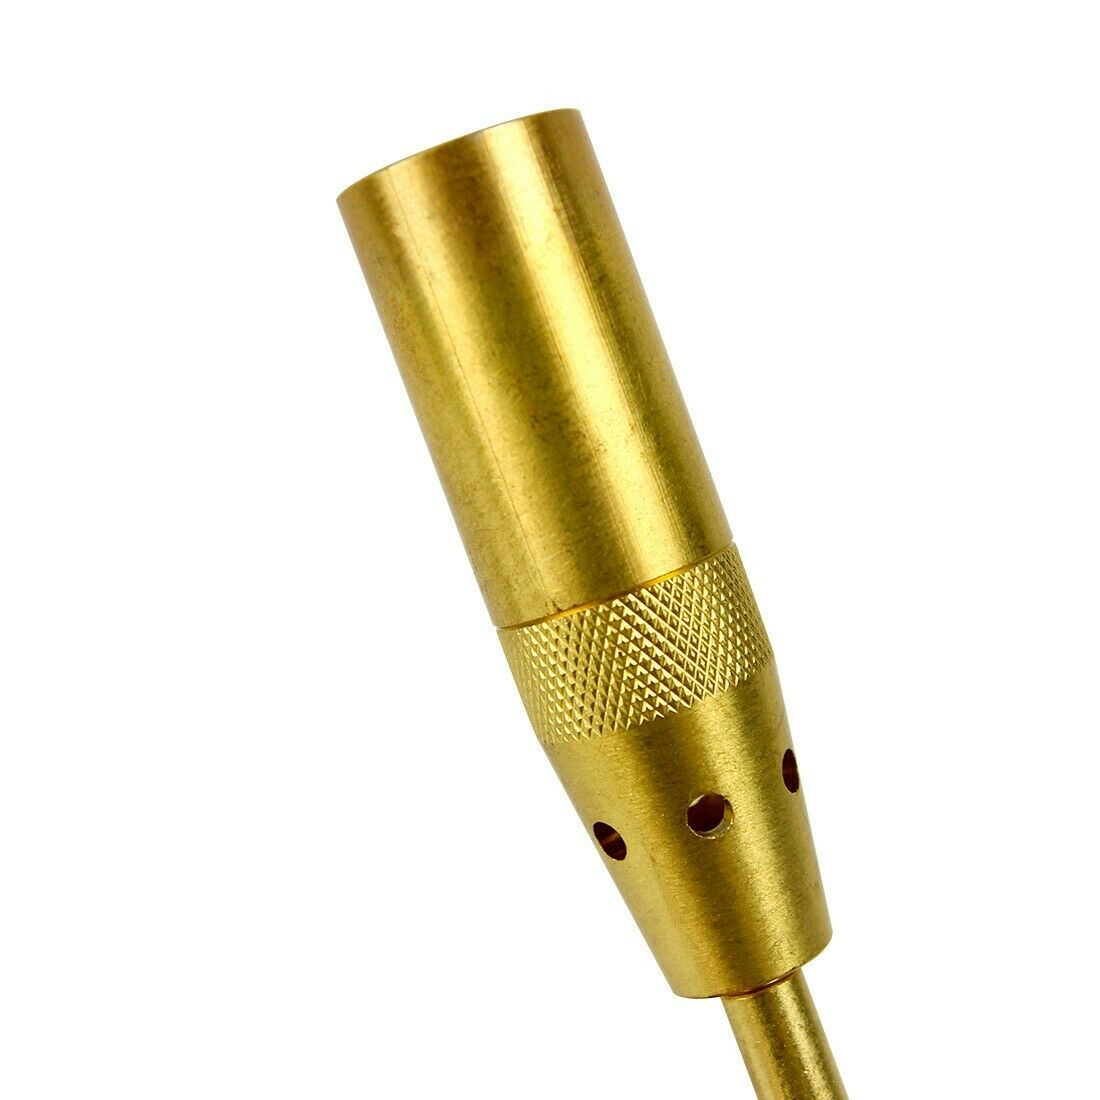 ‎BTM-7012 Propane Torch Head,Super Jumbo Flame Propane Turbo Torch Head capable to surround large diameter copper pipes up to 1.5 inch